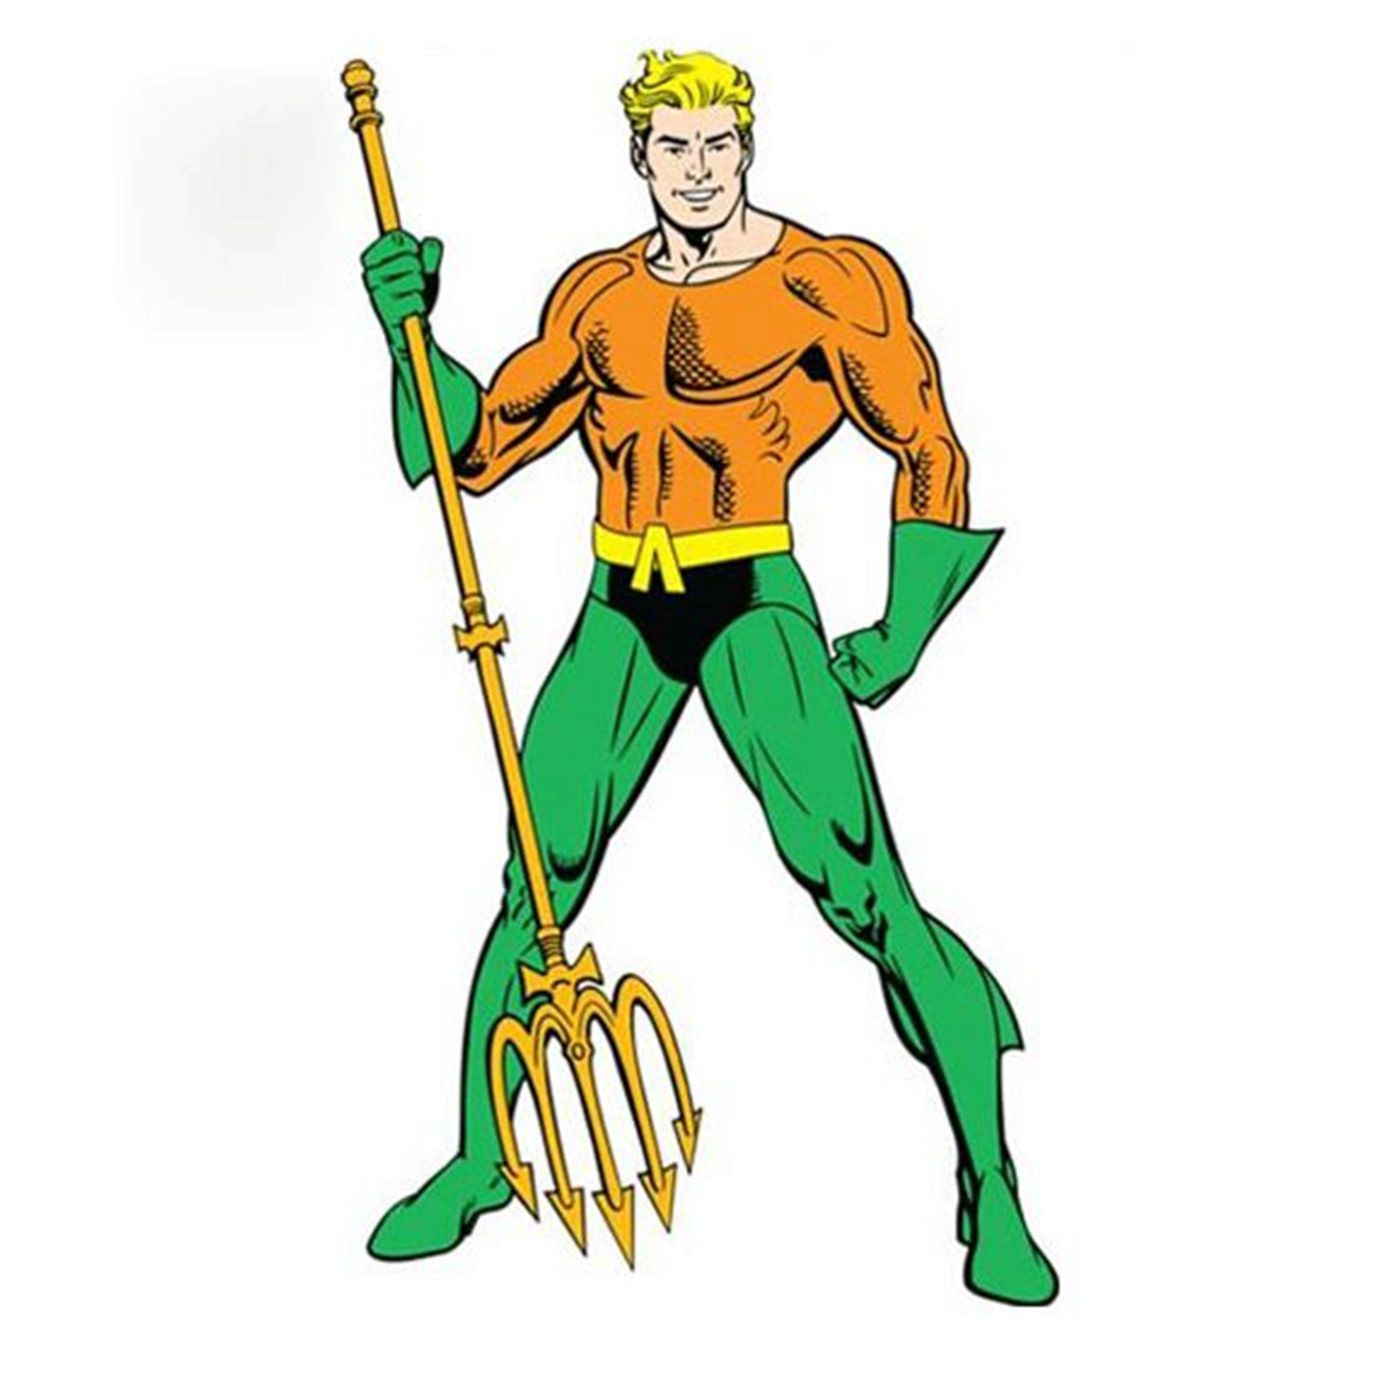 Aquaman Standing Life Size Wall Decal.